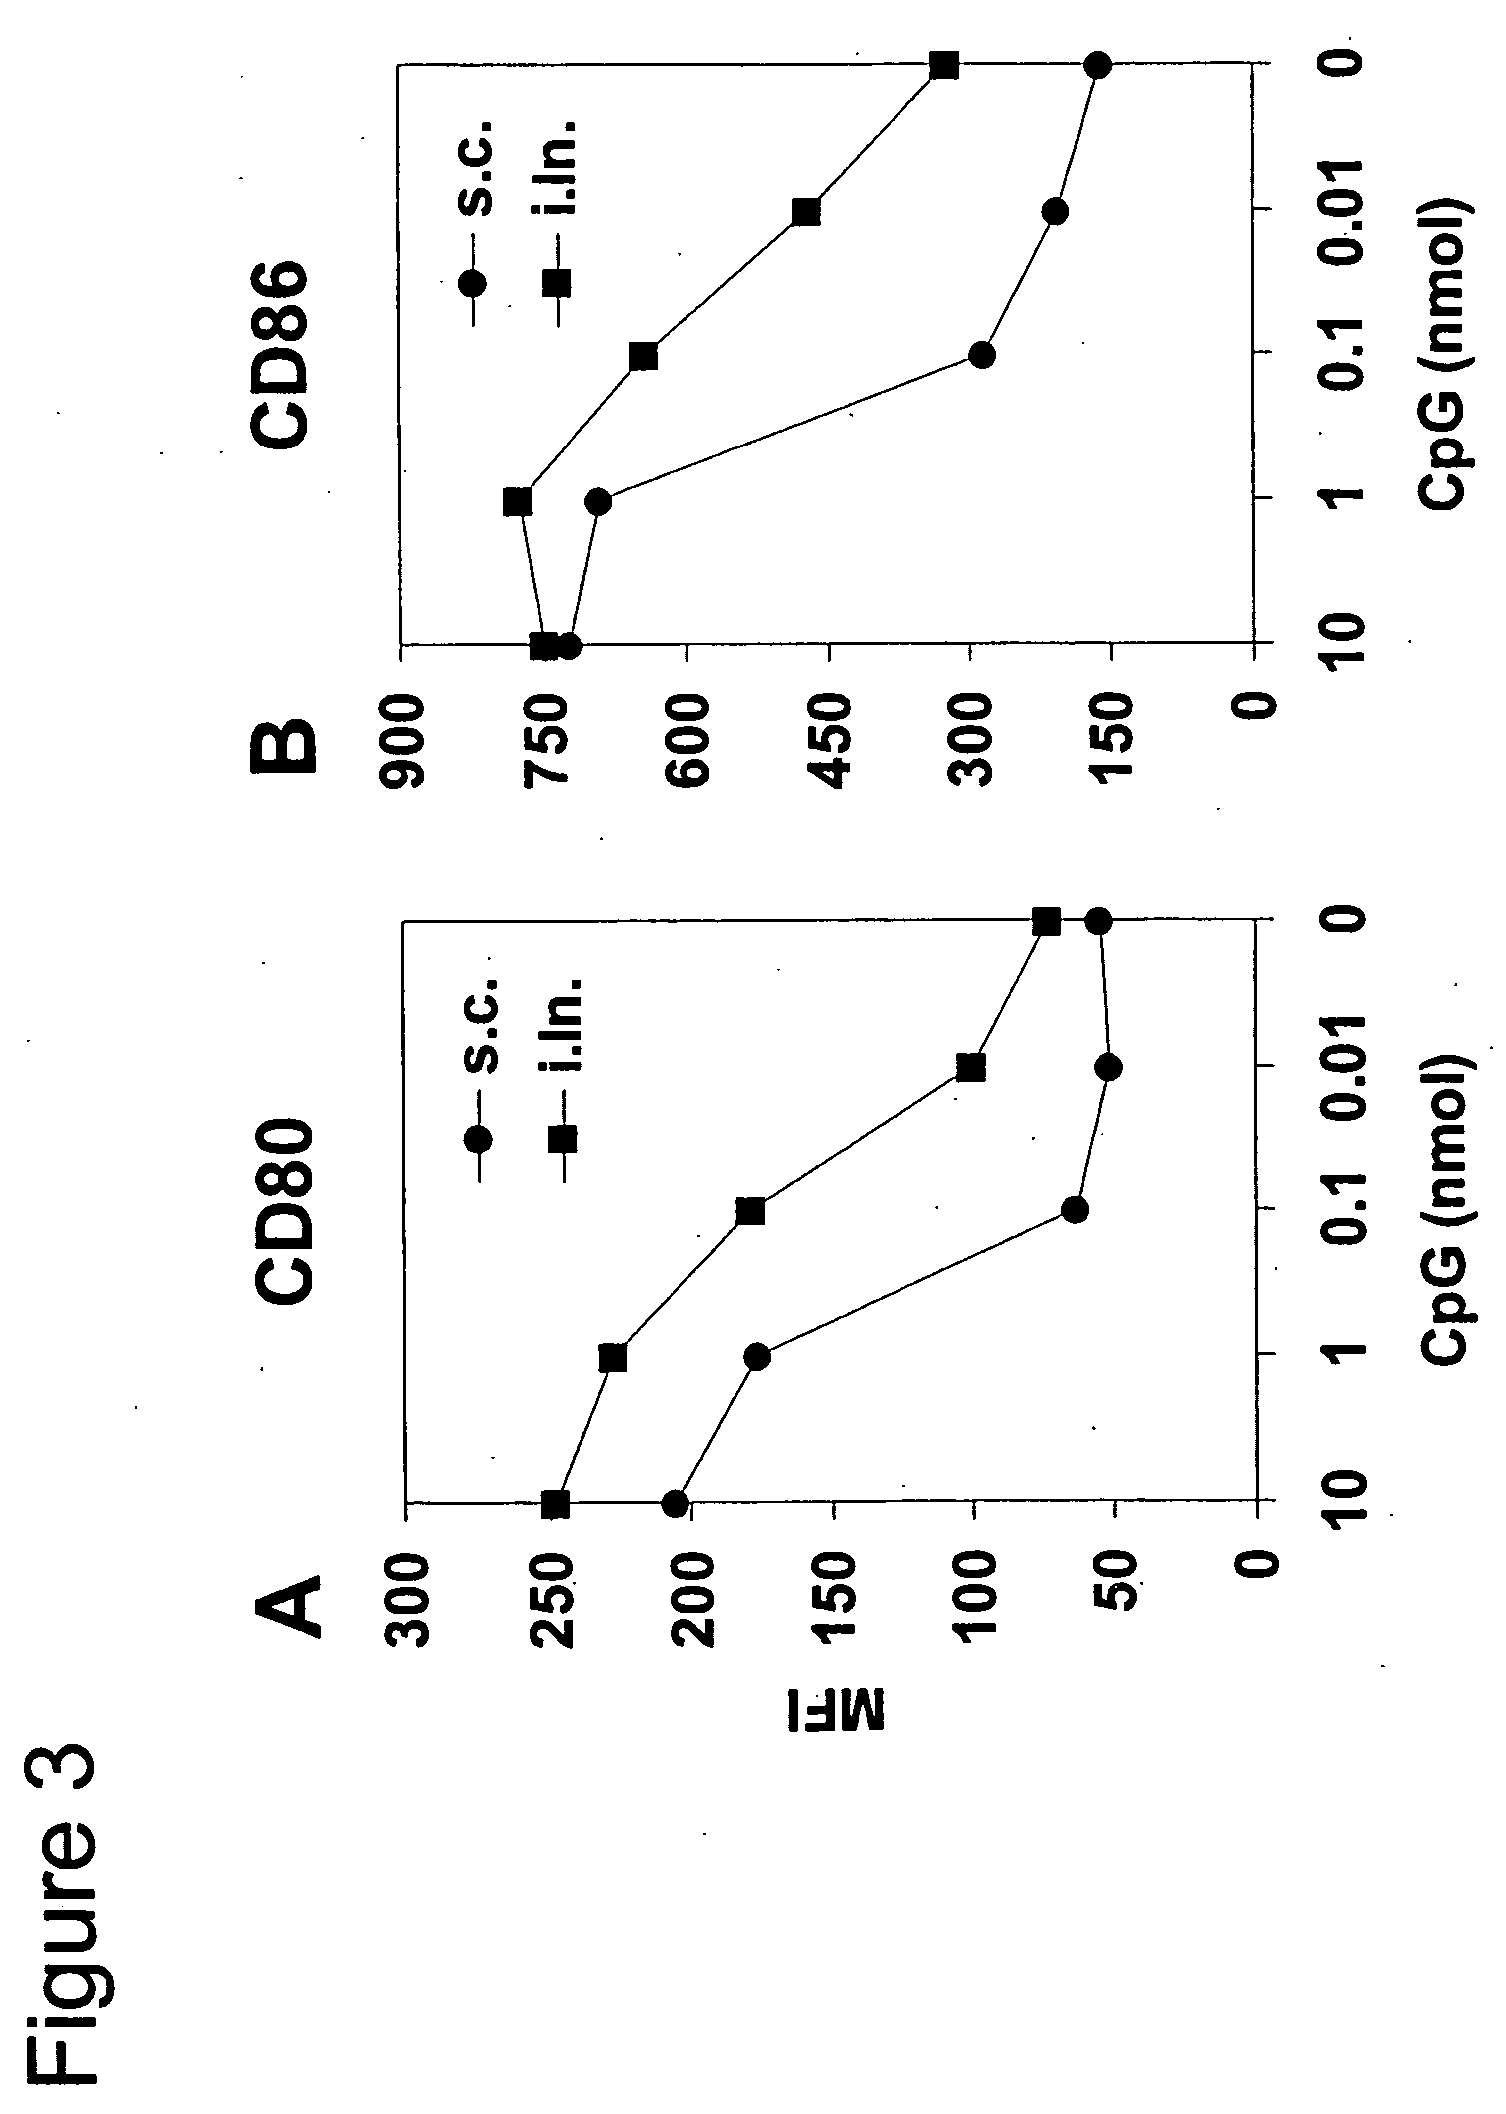 Methods to trigger, maintain and manipulate immune responses by targeted administration of biological response modifiers into lymphoid organs